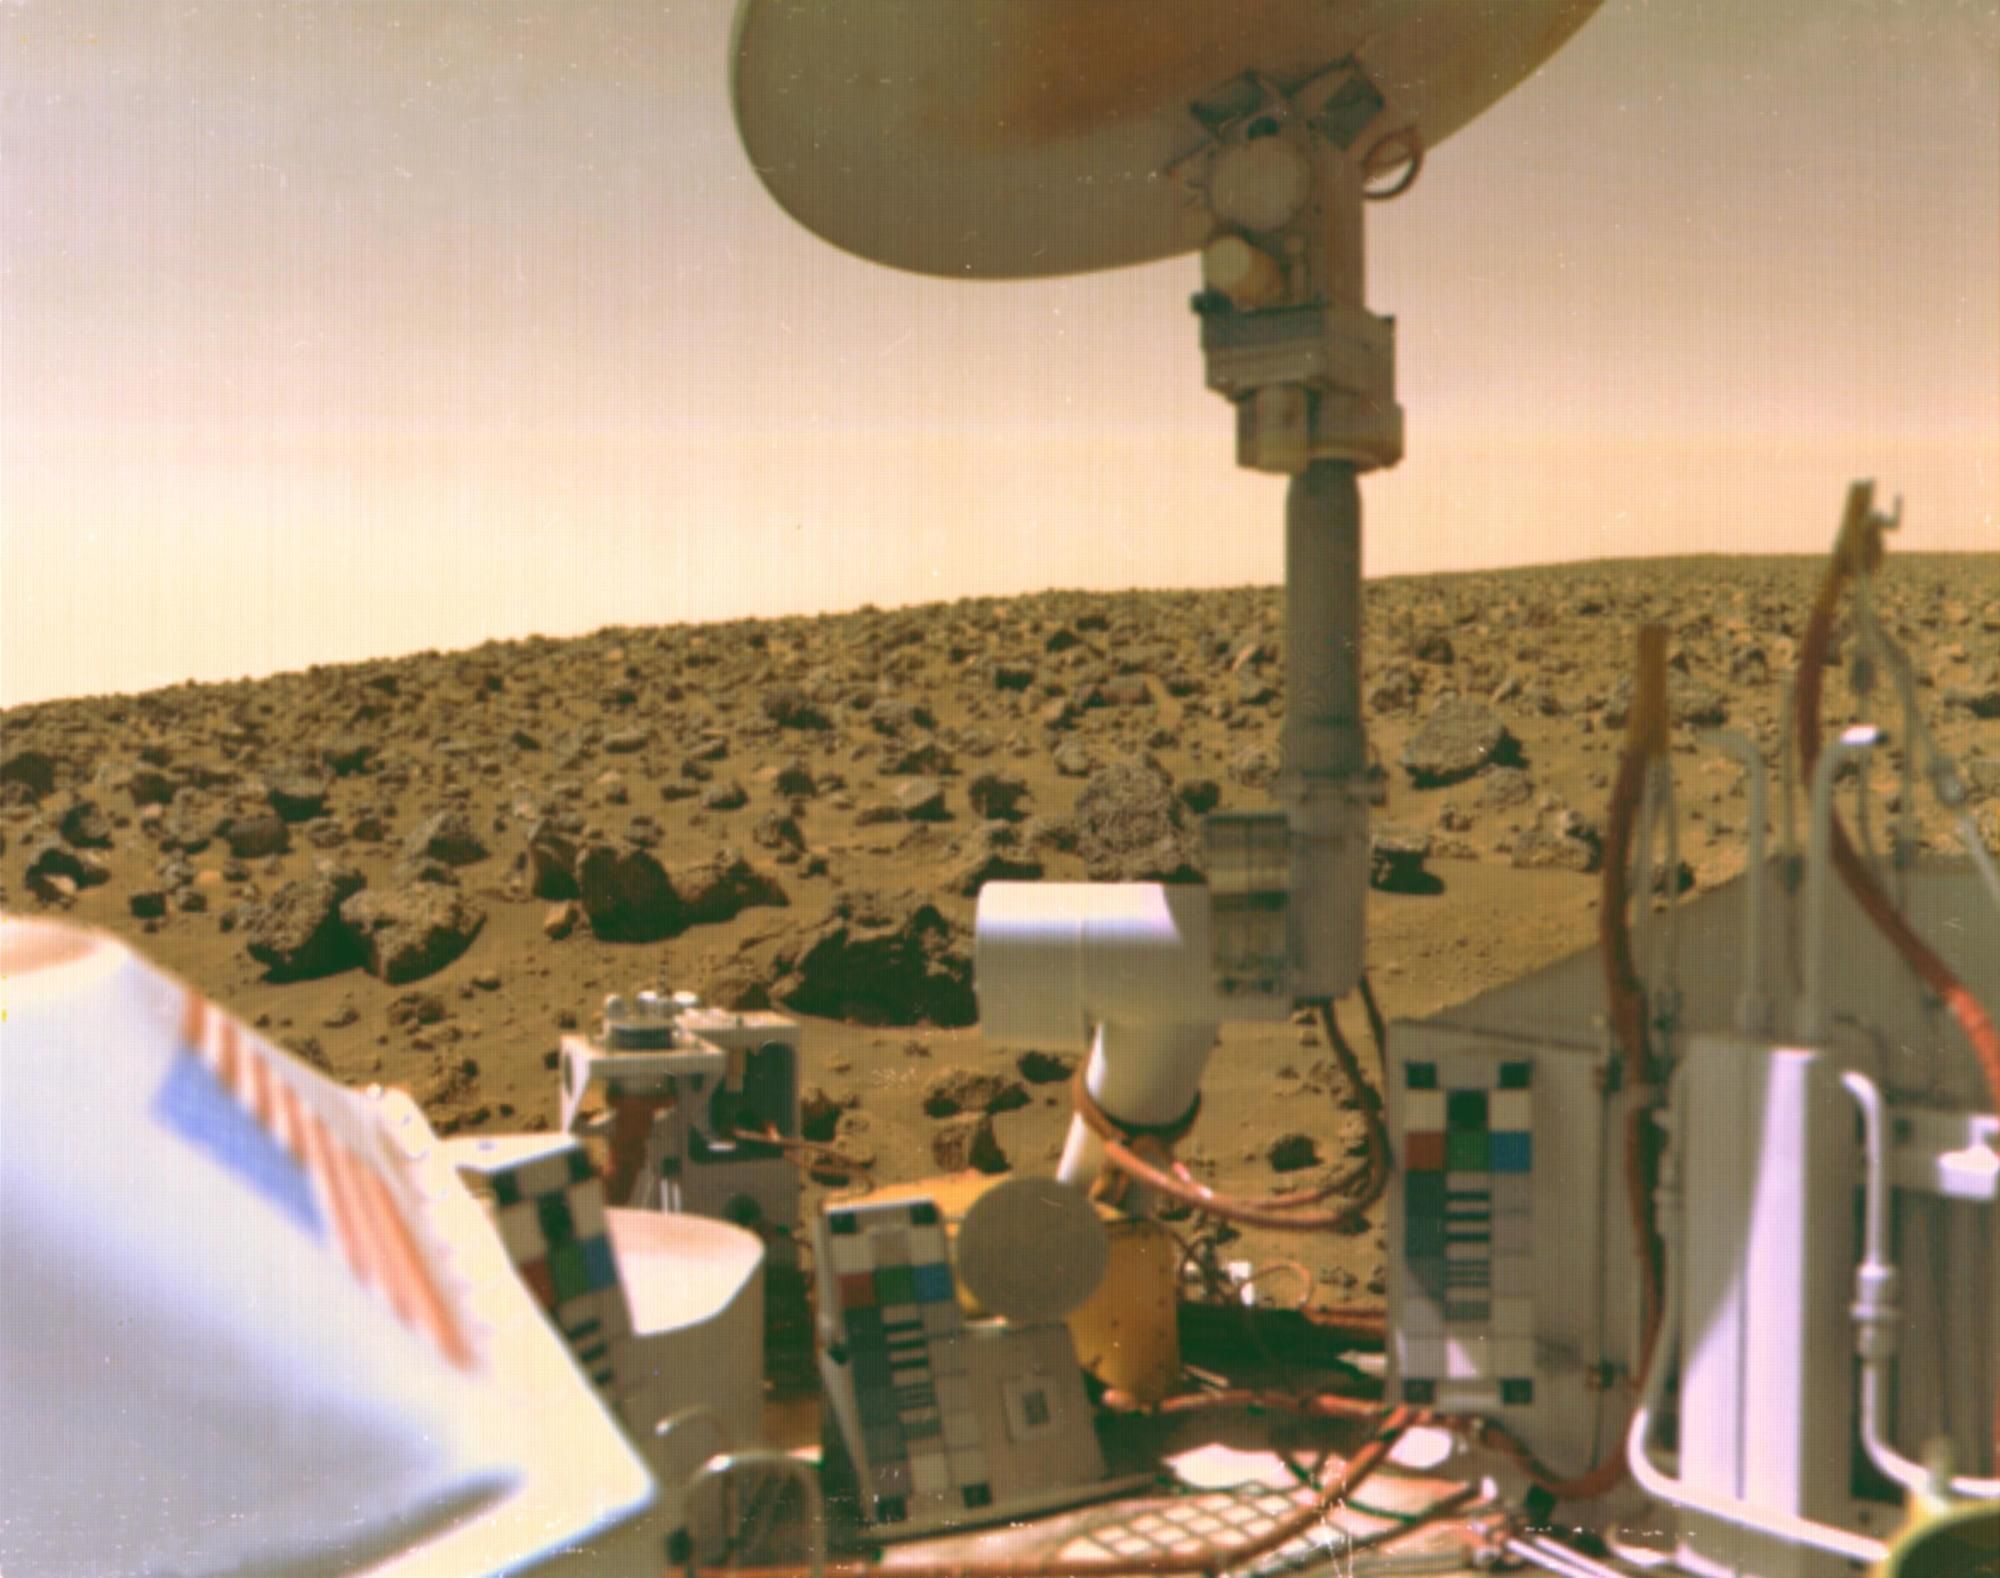 Part of Viking 2 seen with Martian boulder field in the background.